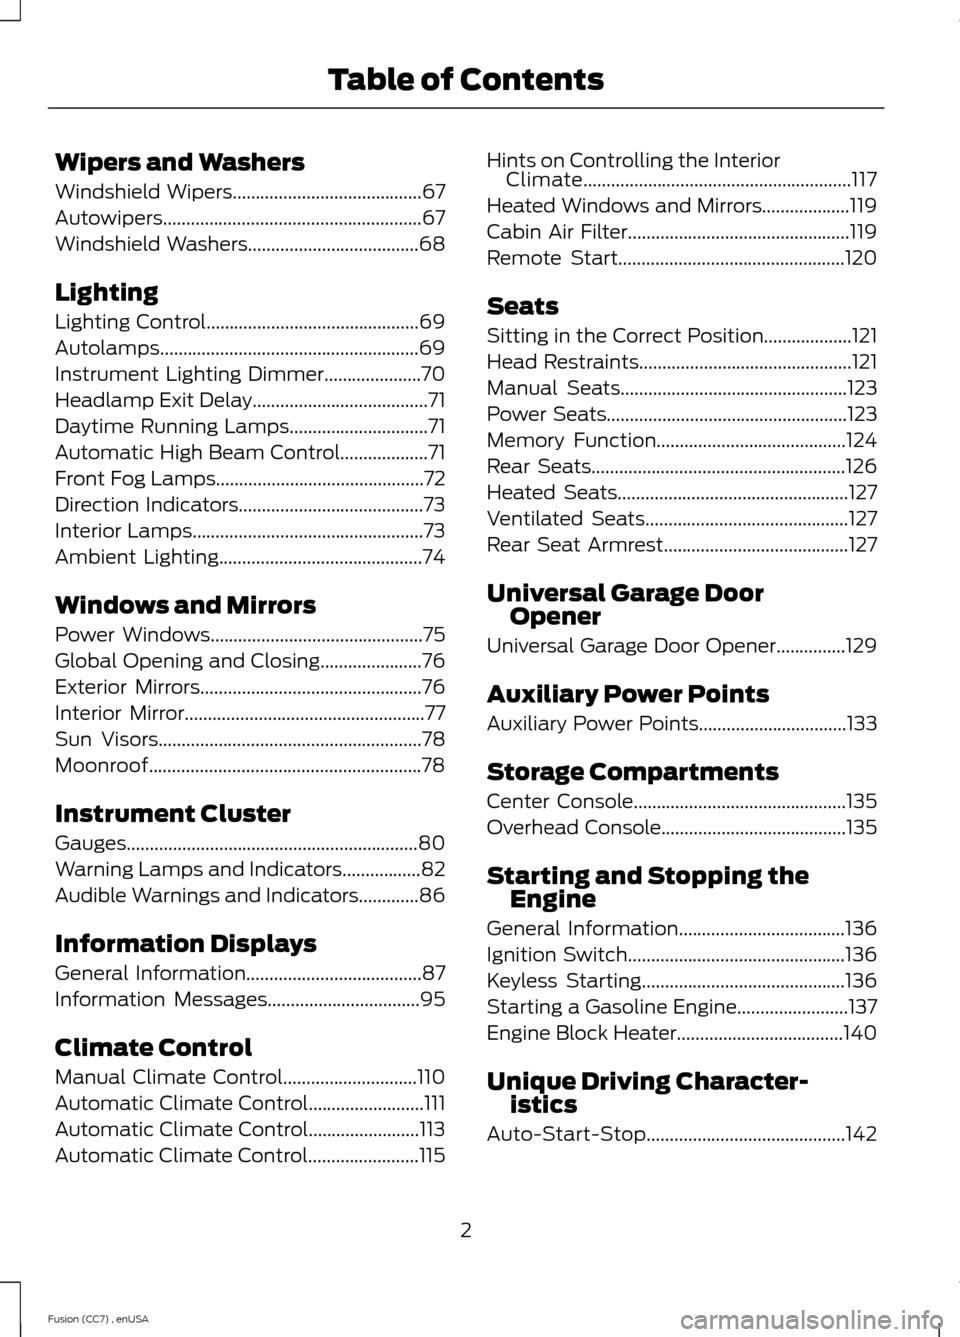 FORD FUSION (AMERICAS) 2014 2.G Owners Manual Wipers and Washers
Windshield Wipers.........................................67
Autowipers........................................................67
Windshield Washers.................................